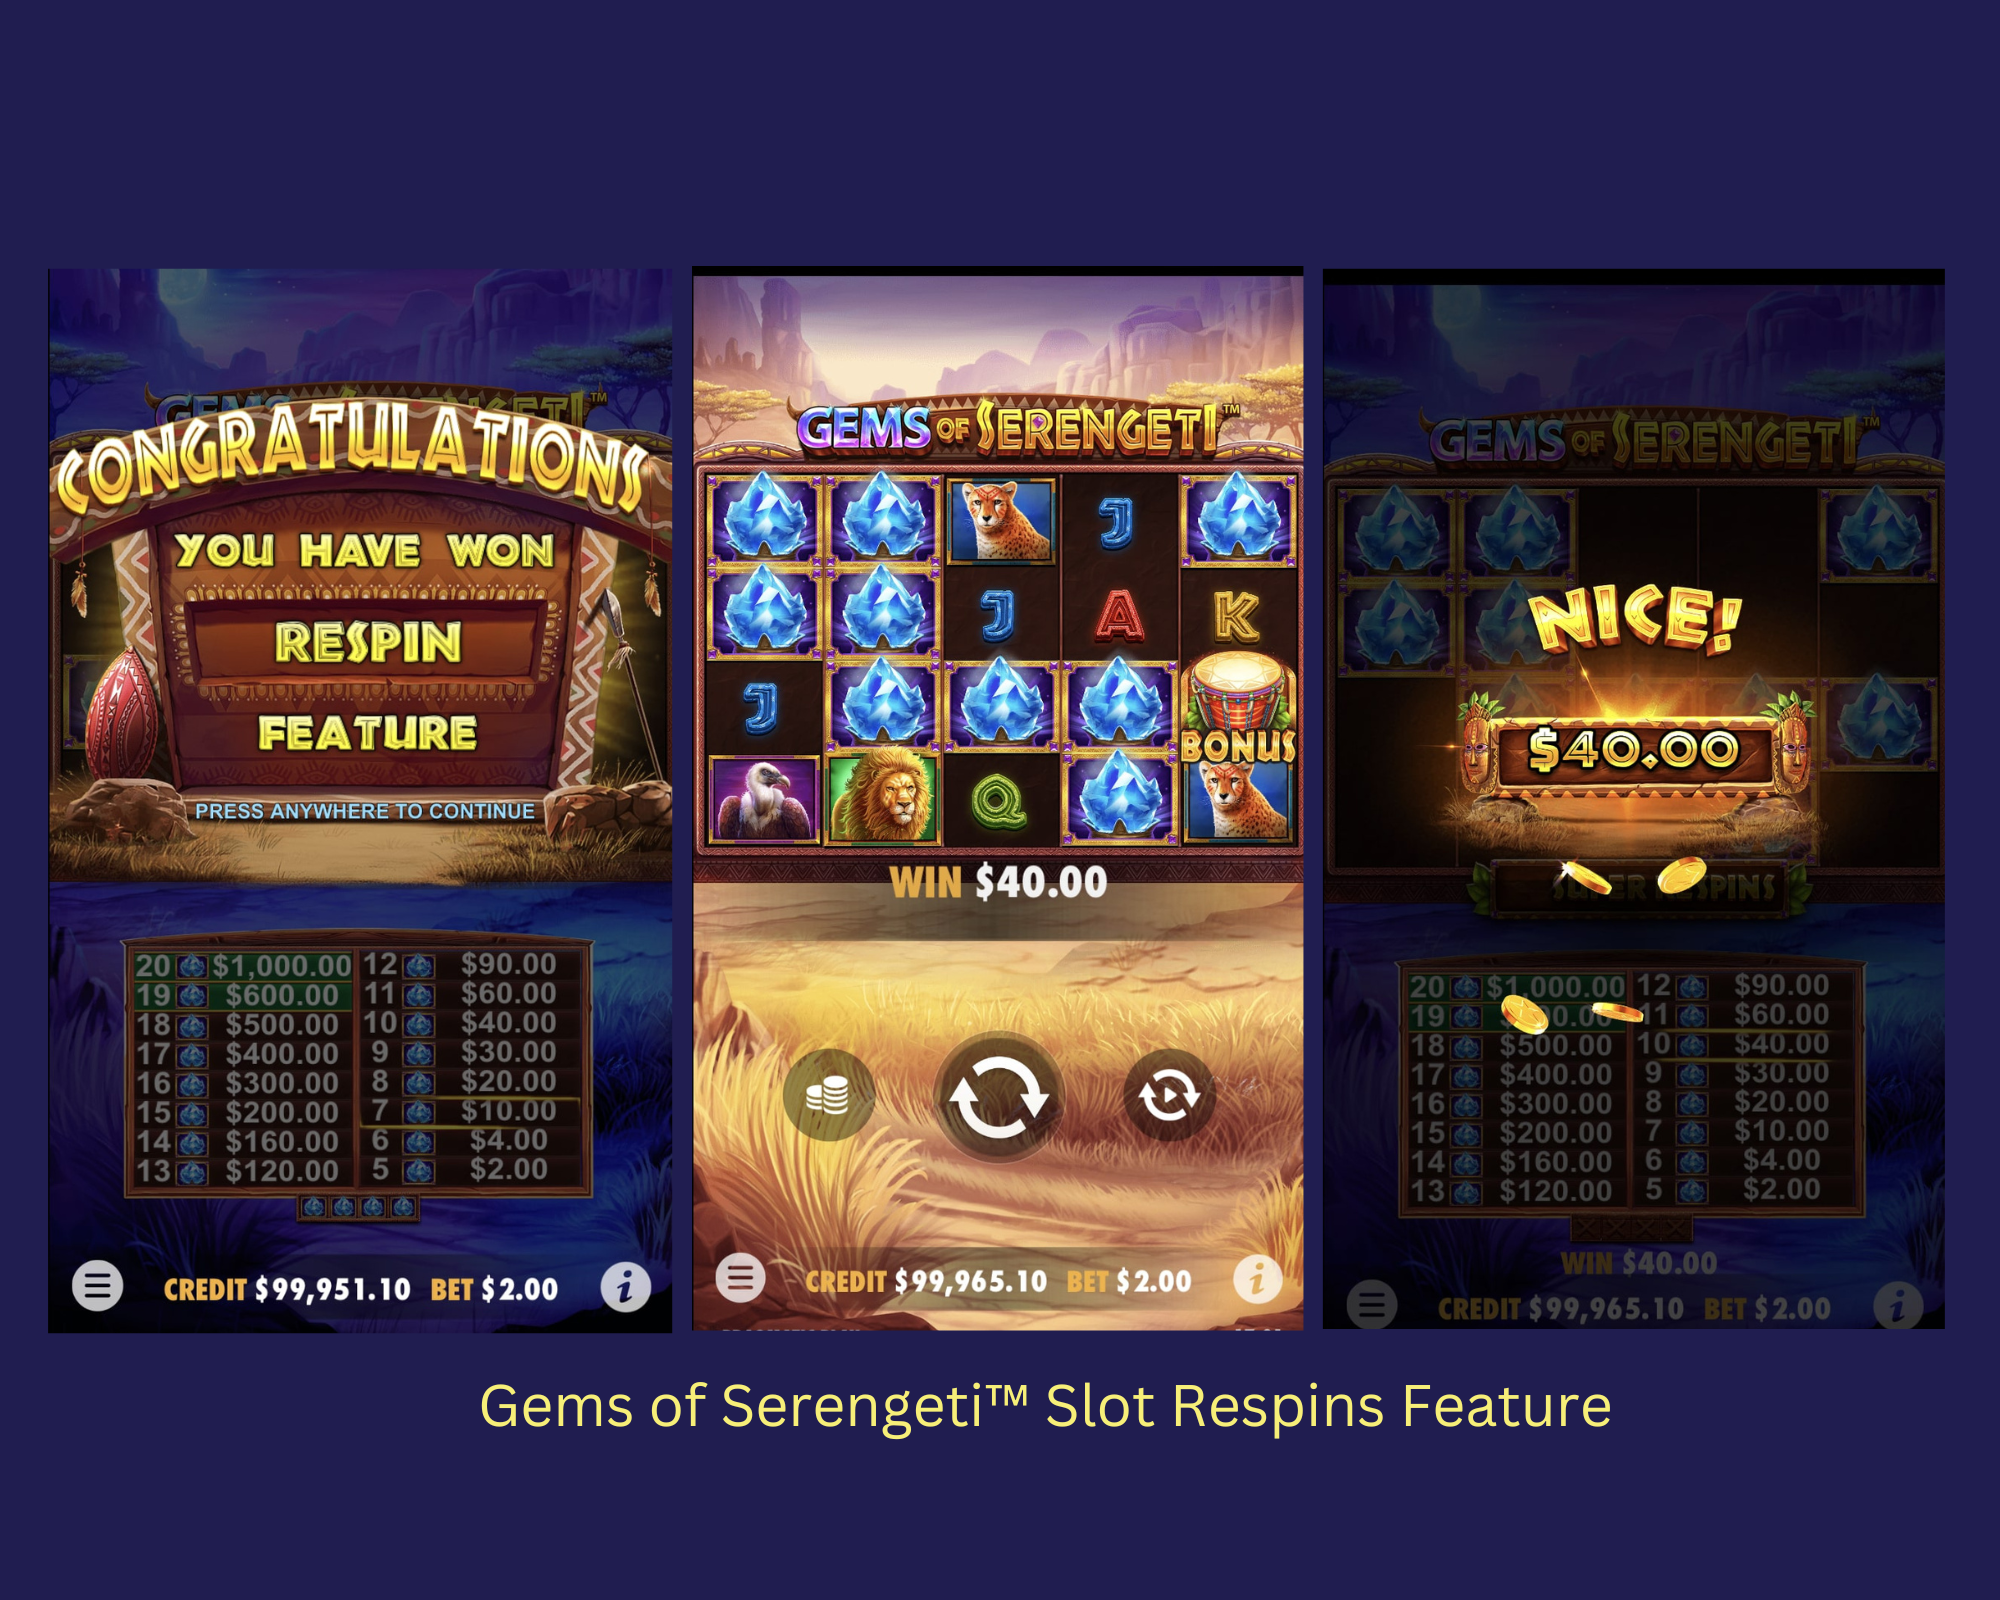 Gems of Serengeti™ Slot Respins Feature